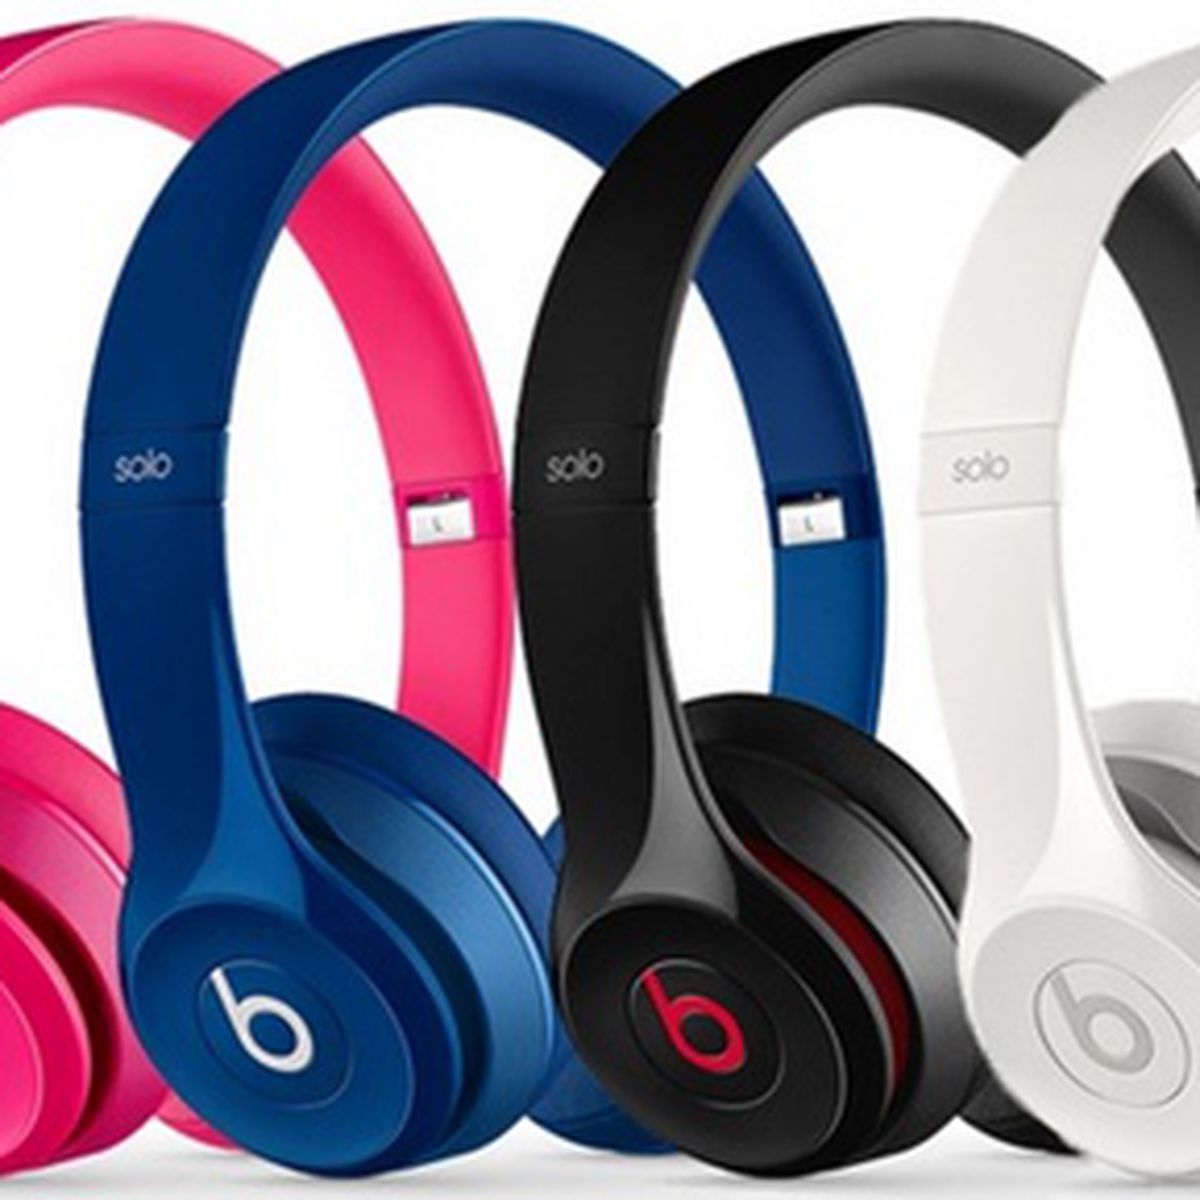 Apple Launches Back to Promotion, Offers Free Beats Solo2 Headphones With Mac Purchase - MacRumors